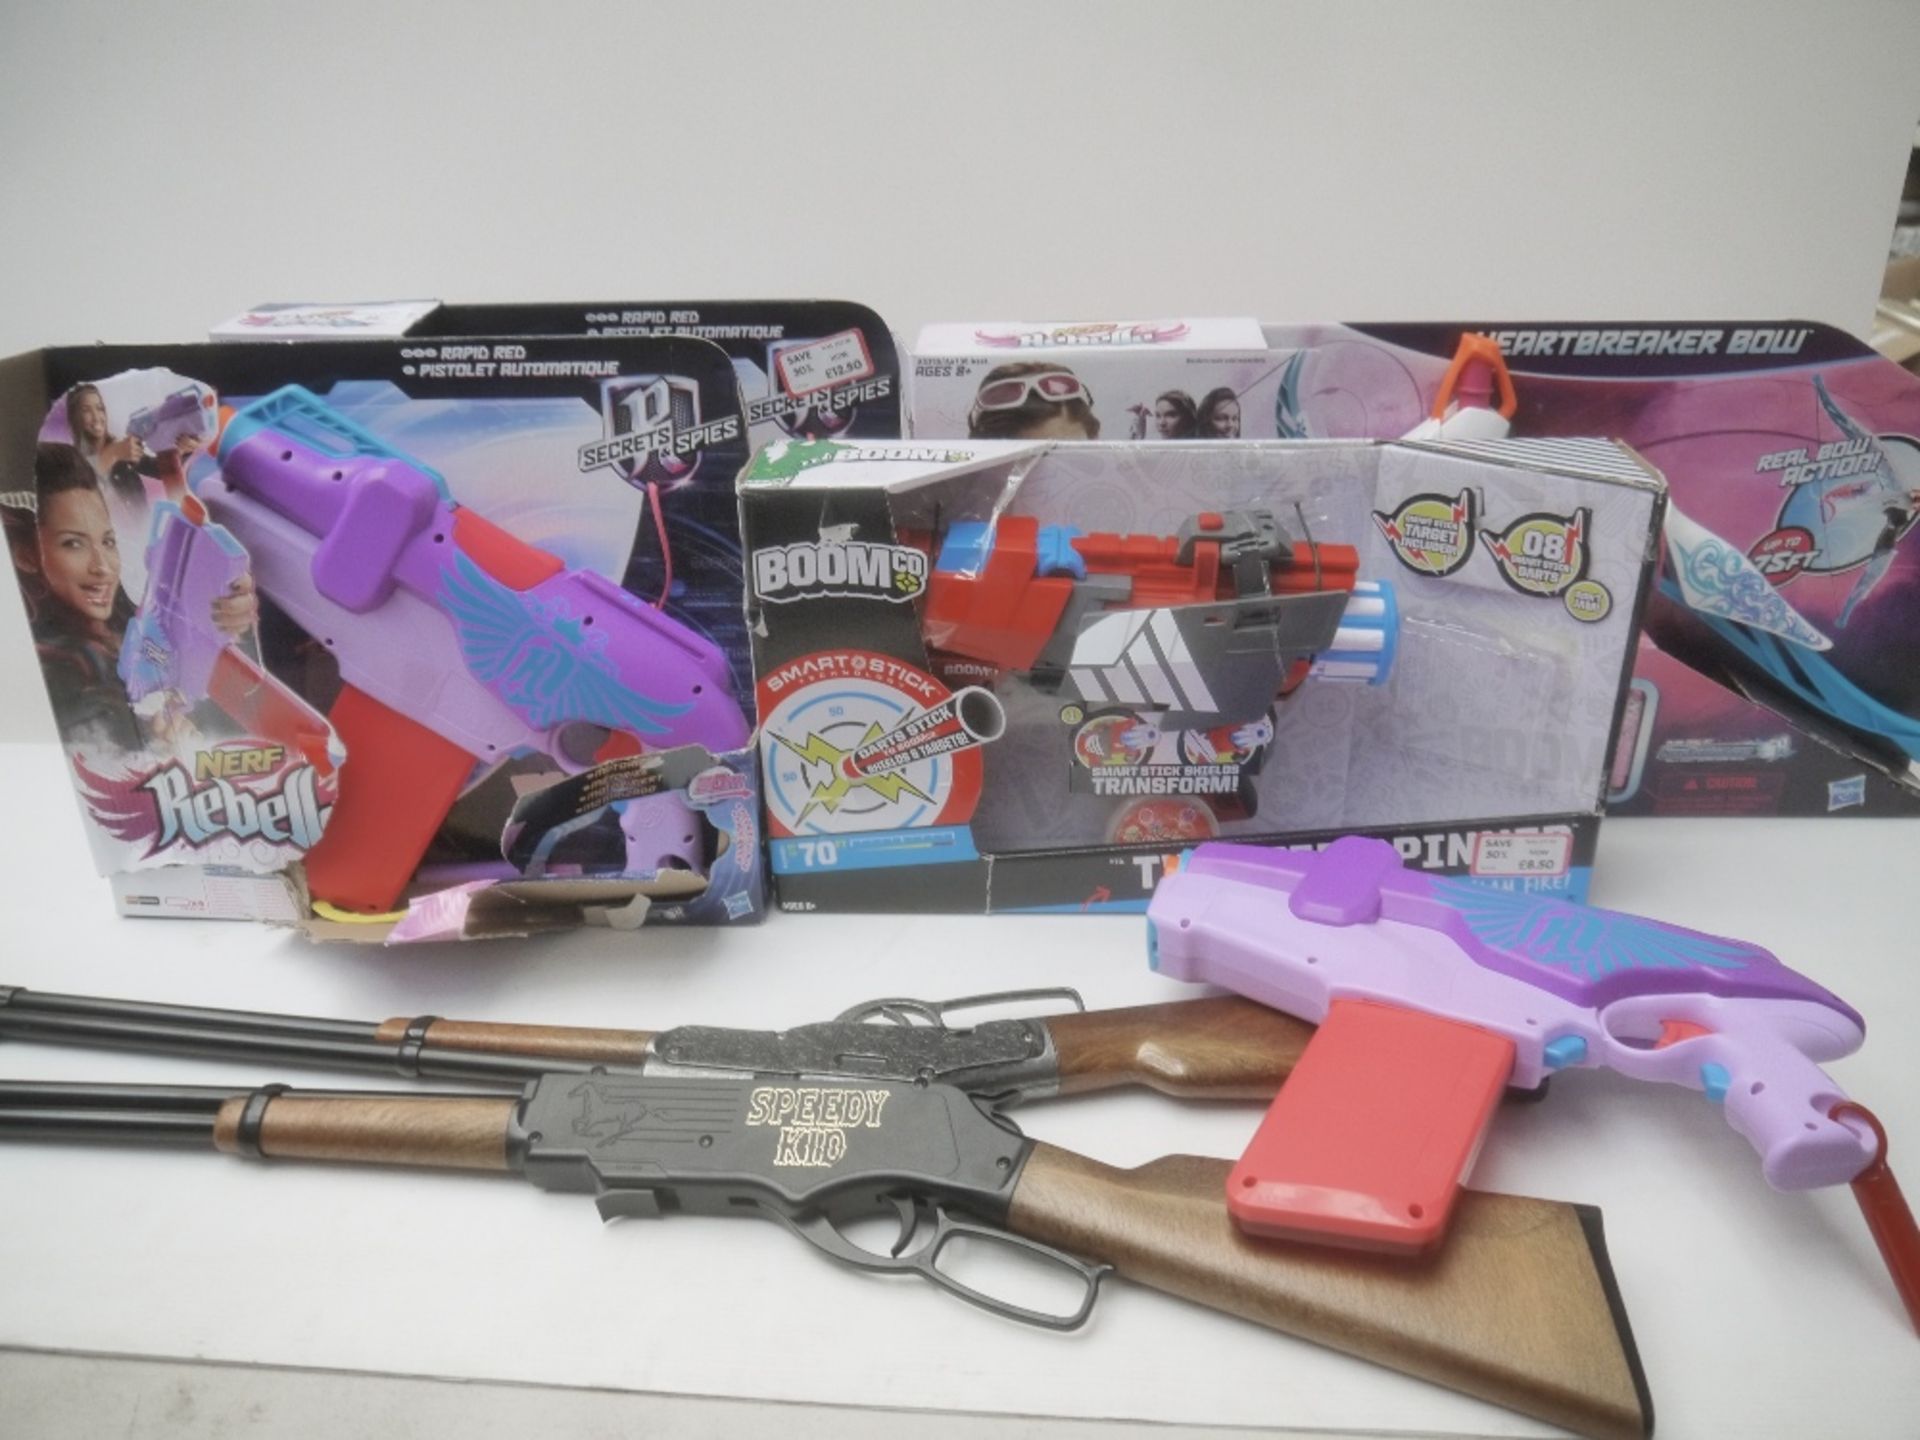 7x Toys in this lot, being the following: 2x SpeedyKit Western Style Rifle & 5x Nerf rebelle Dart